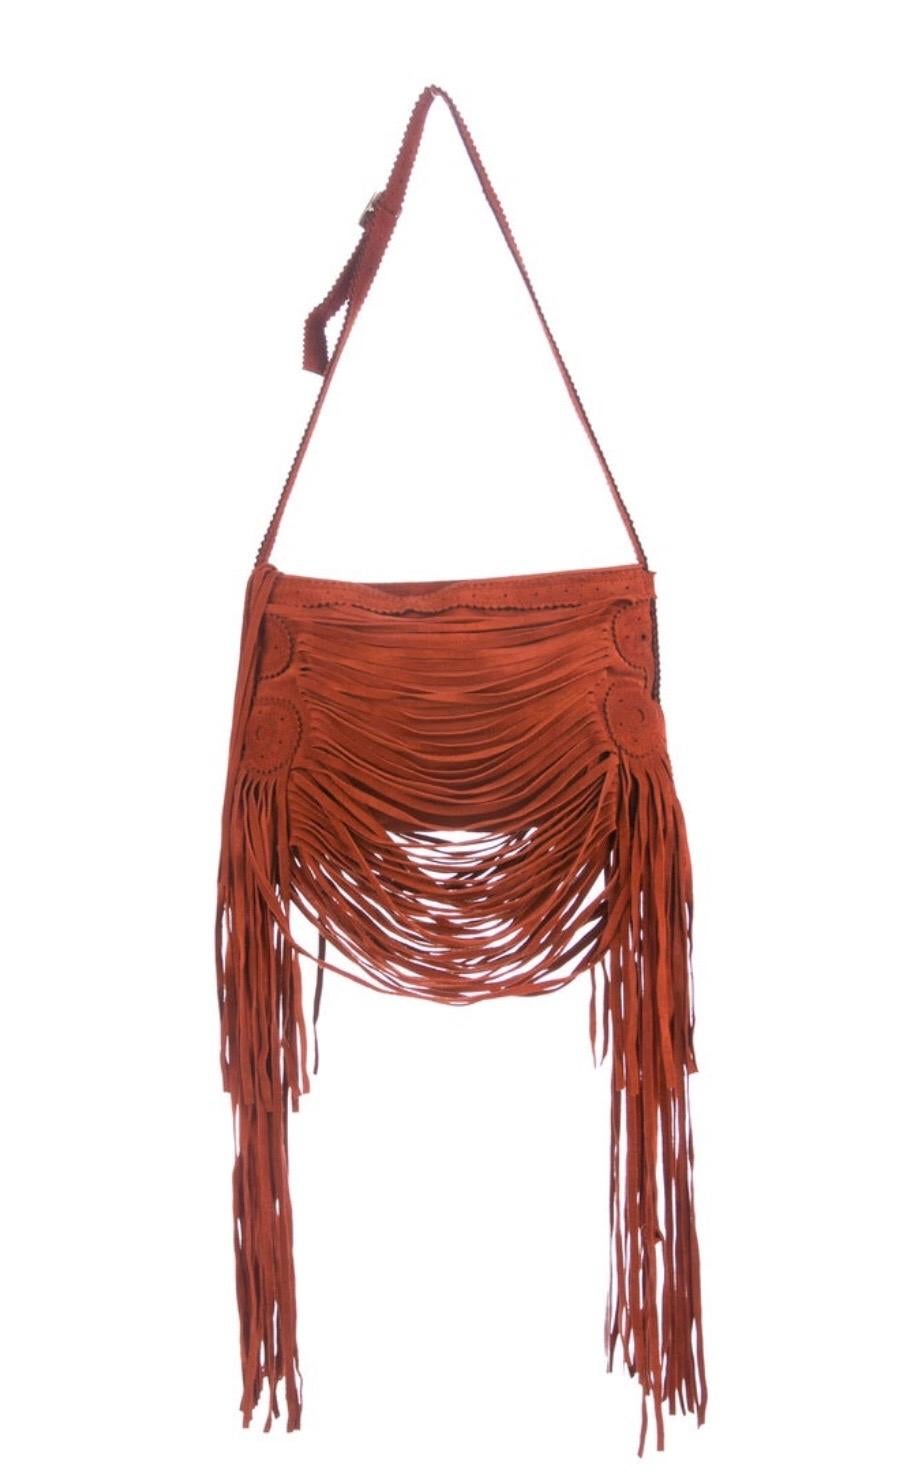 Rust suede Jean Paul Gaultier shoulder bag. Fringe accents throughout exterior, black satin lining and zip closure at top. Condition: Excellent.  7